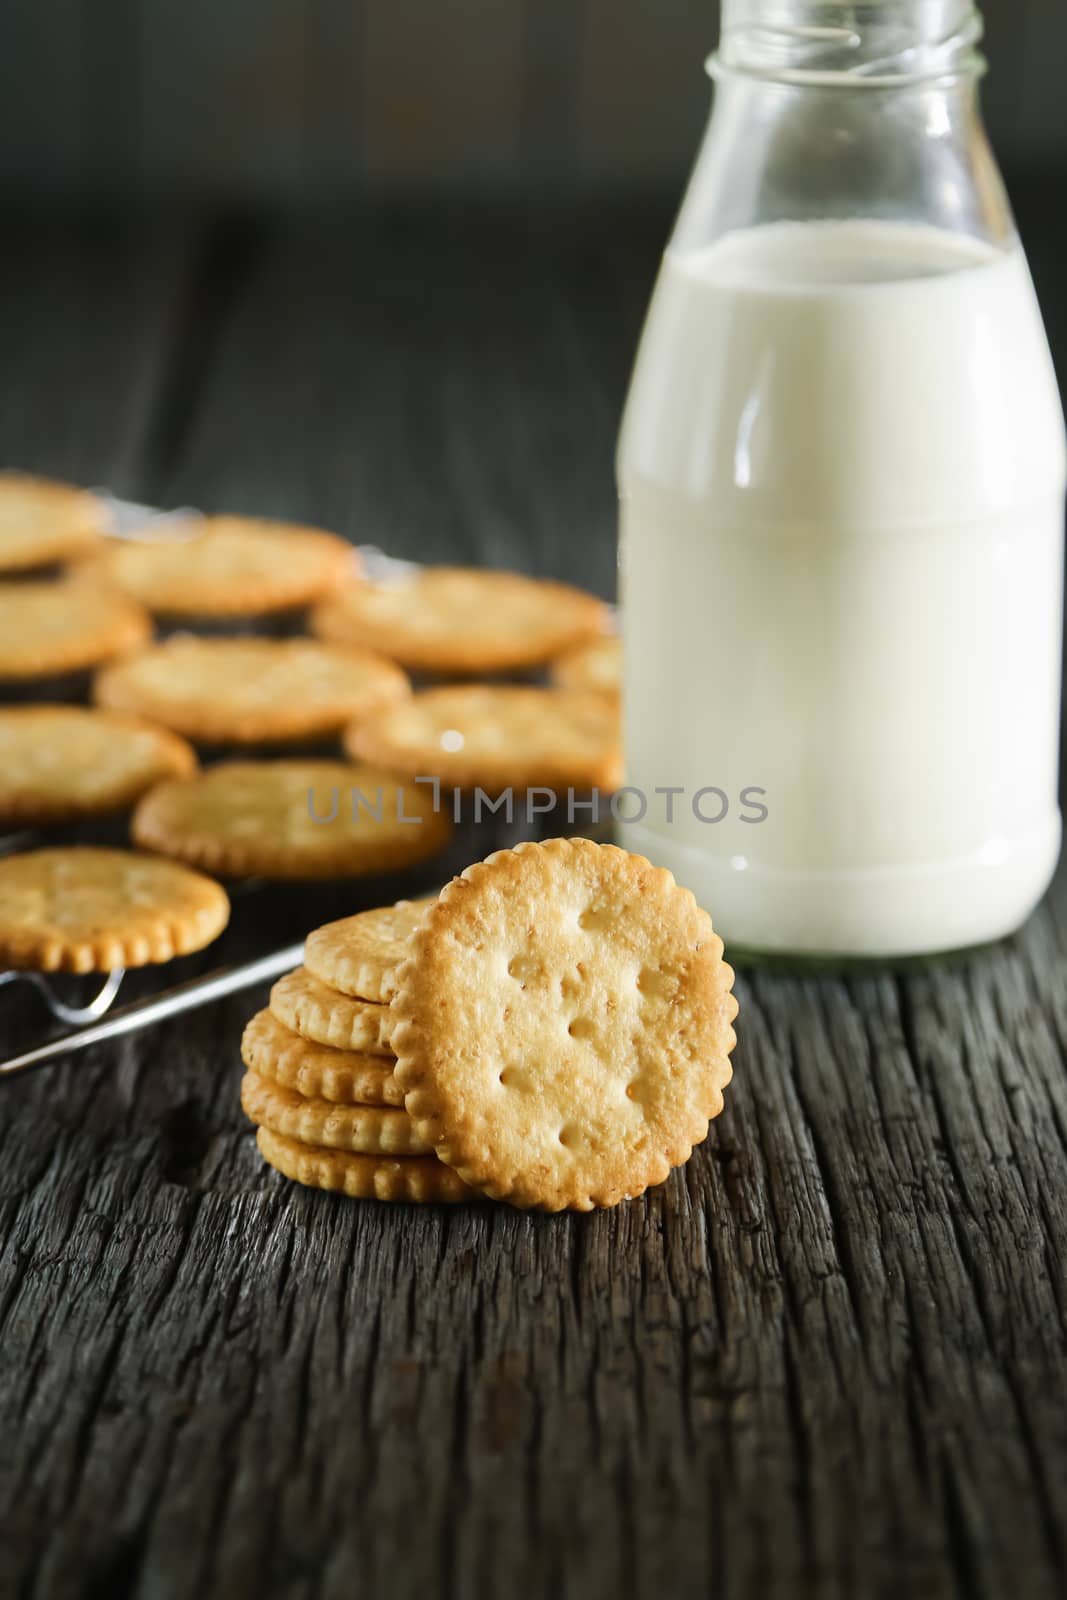 Delicious biscuits with milk on a wooden table.